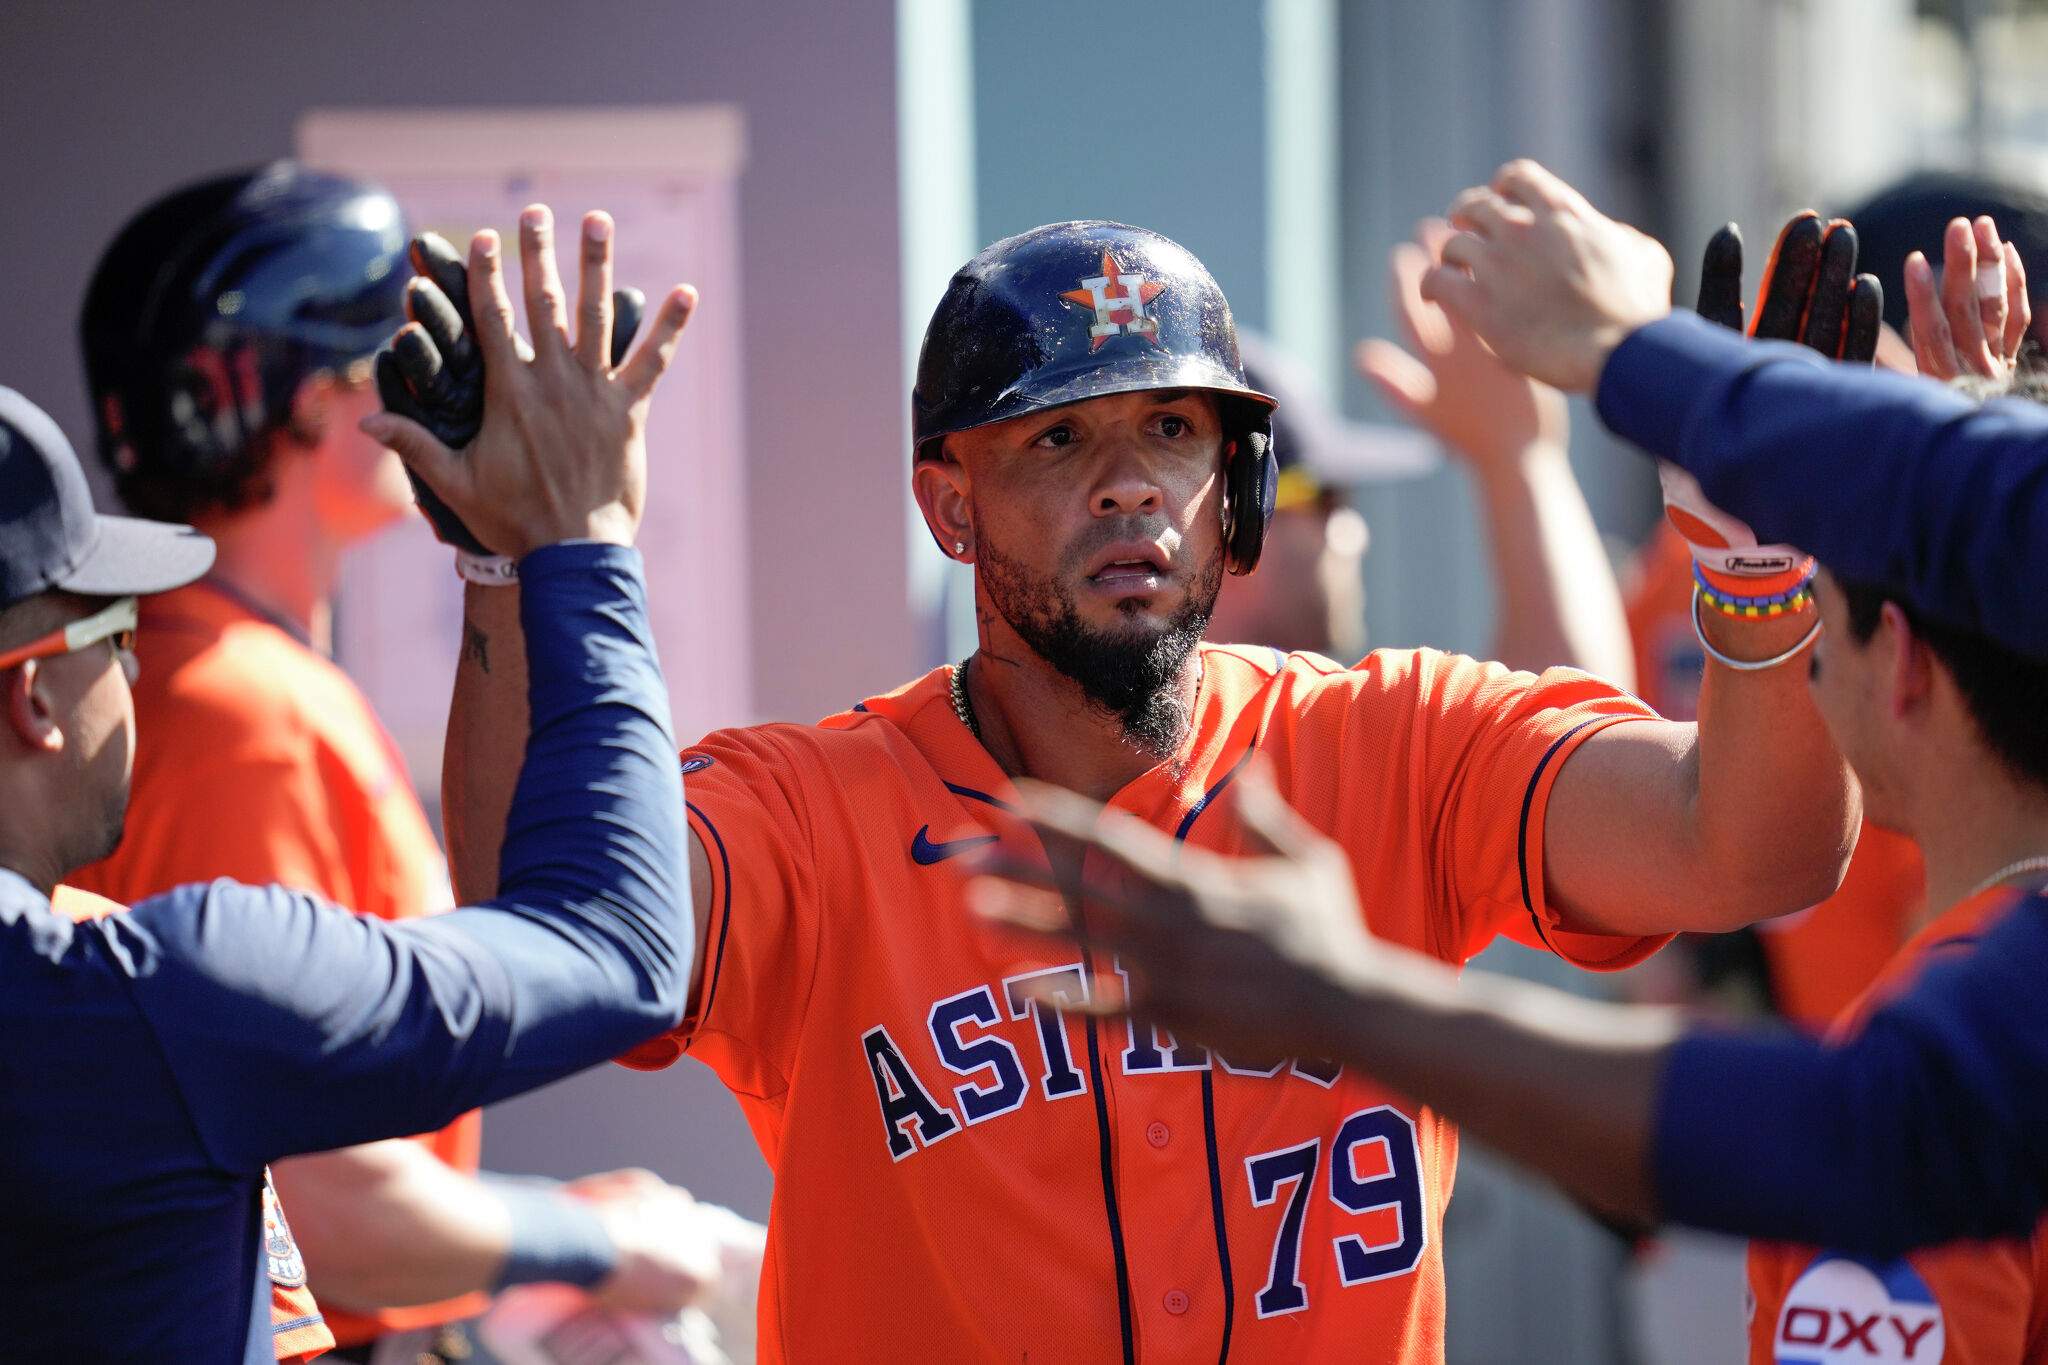 Is José Abreu about to get hot? Astros coach sees positive signs